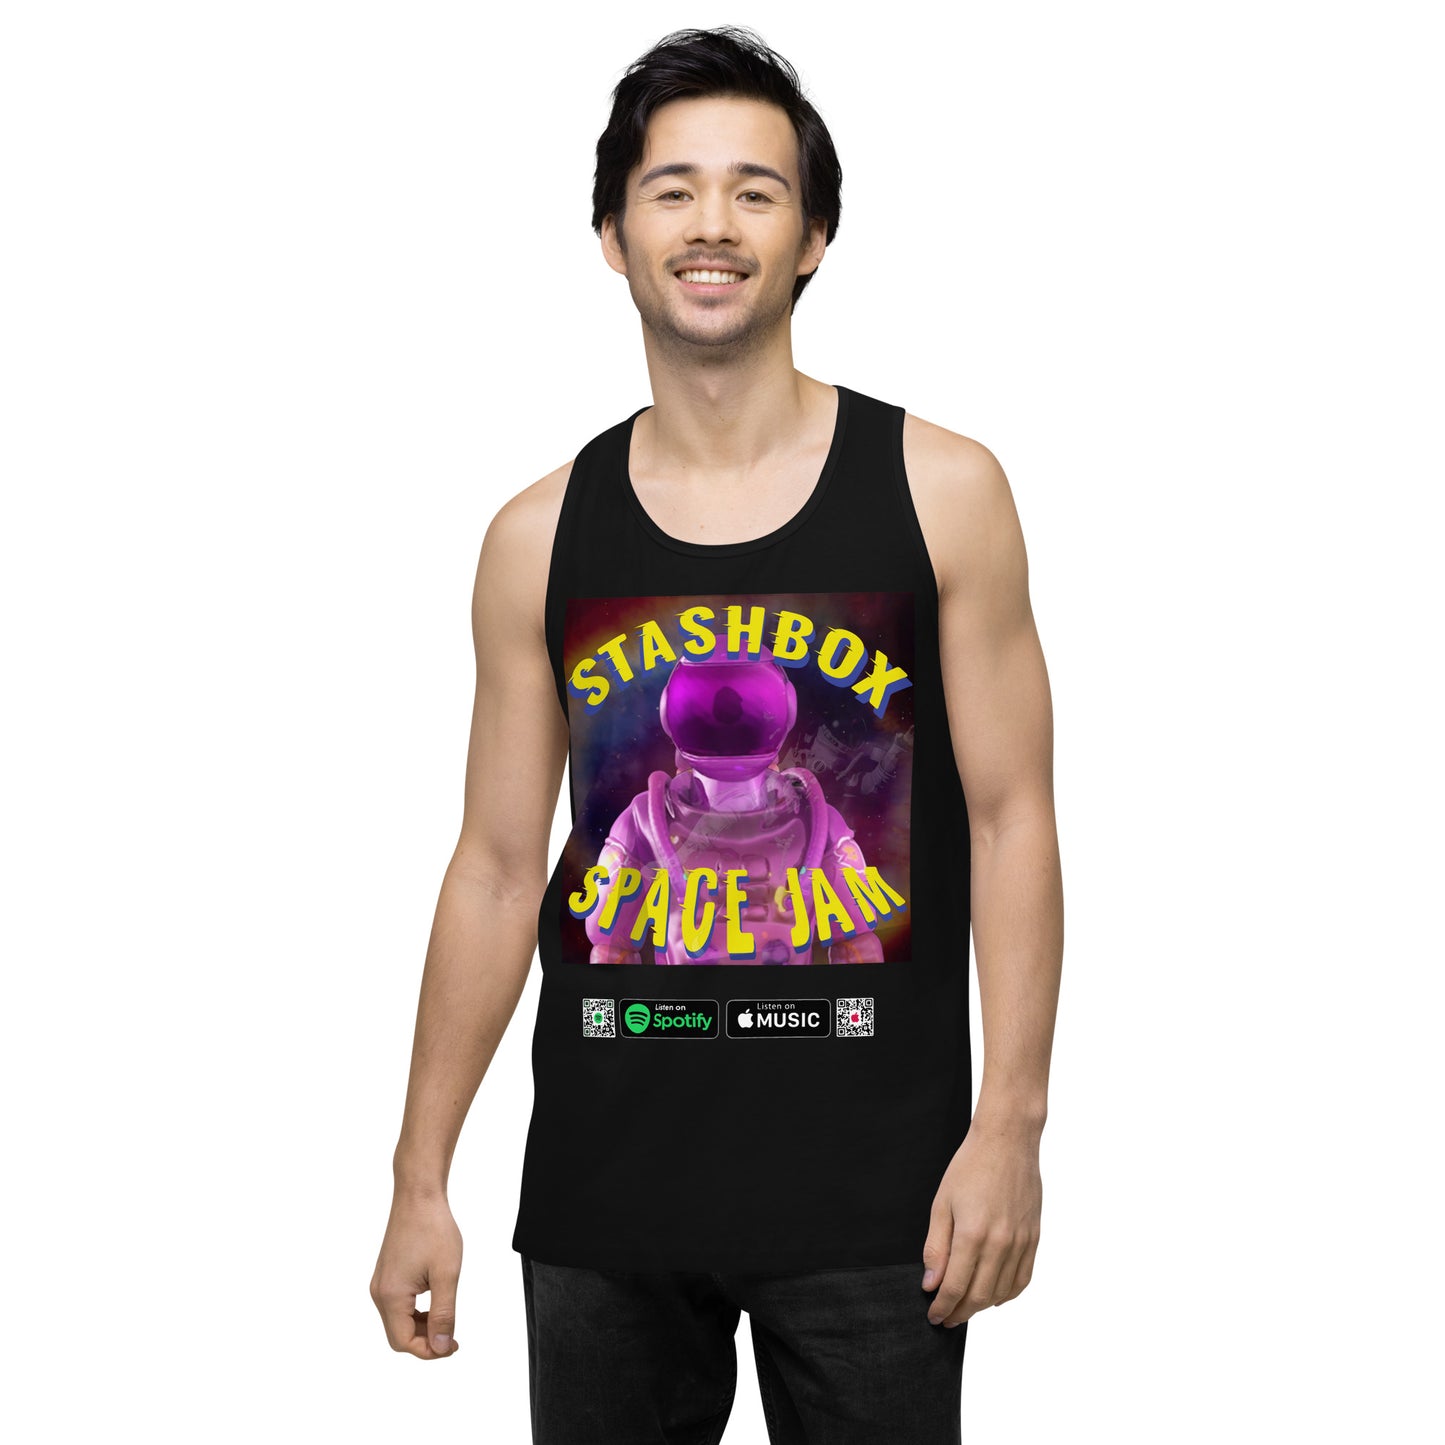 Dive into the Cosmos: Space Jam - Stashbox Men’s Premium Tank Top, Design #005. Embrace cosmic style with this premium tank, perfect for space enthusiasts. Comfort meets artistry in this celestial fashion statement. #StashboxGalaxy #SpaceFashion #CosmicComfort